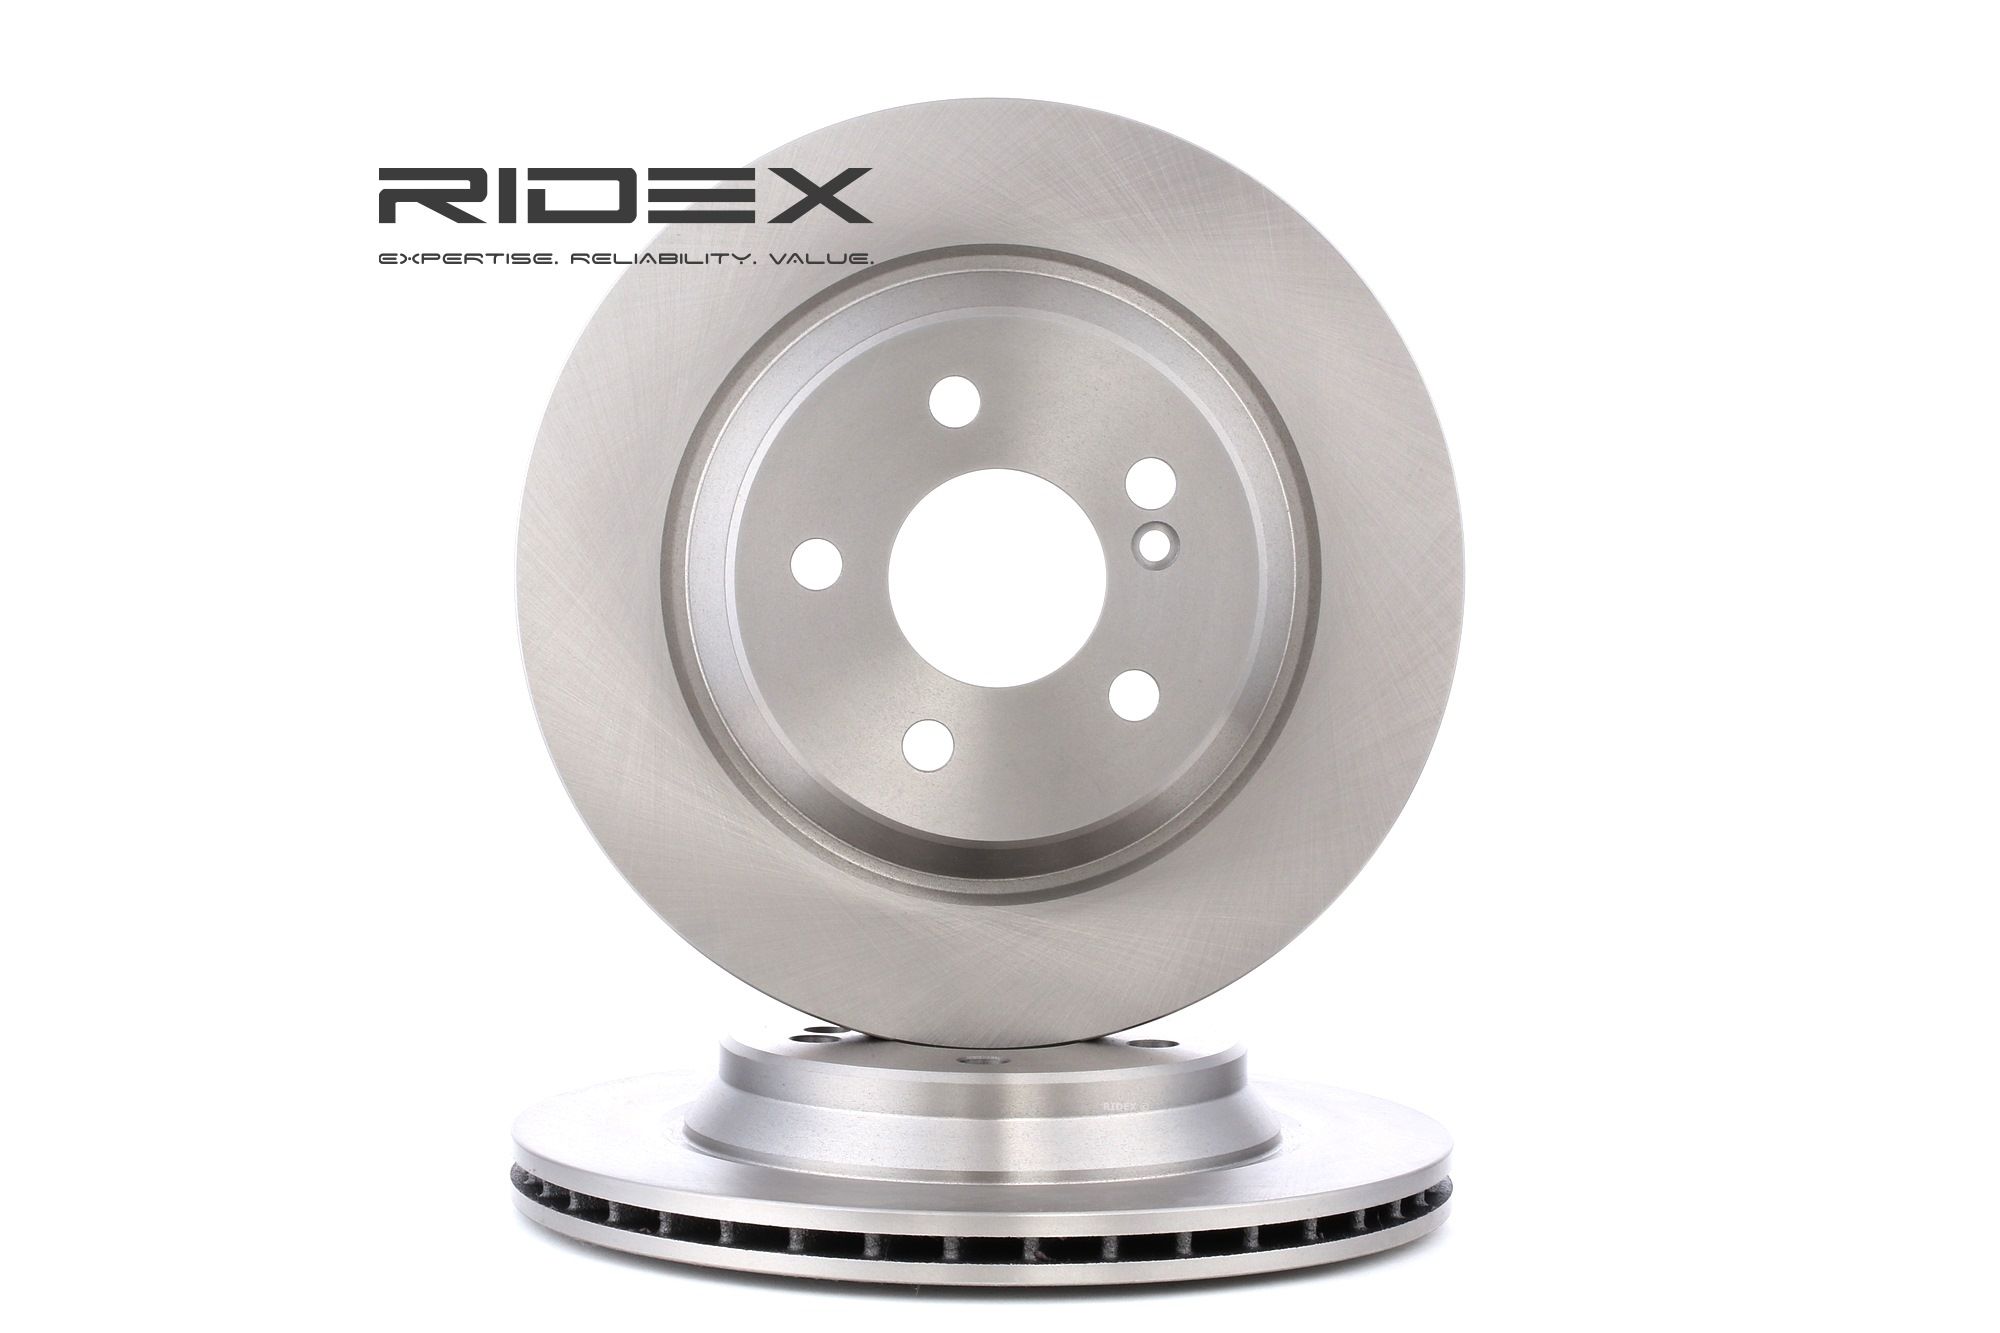 RIDEX 82B0638 Brake disc 300,0x22mm, 5/6x112, Vented, Uncoated